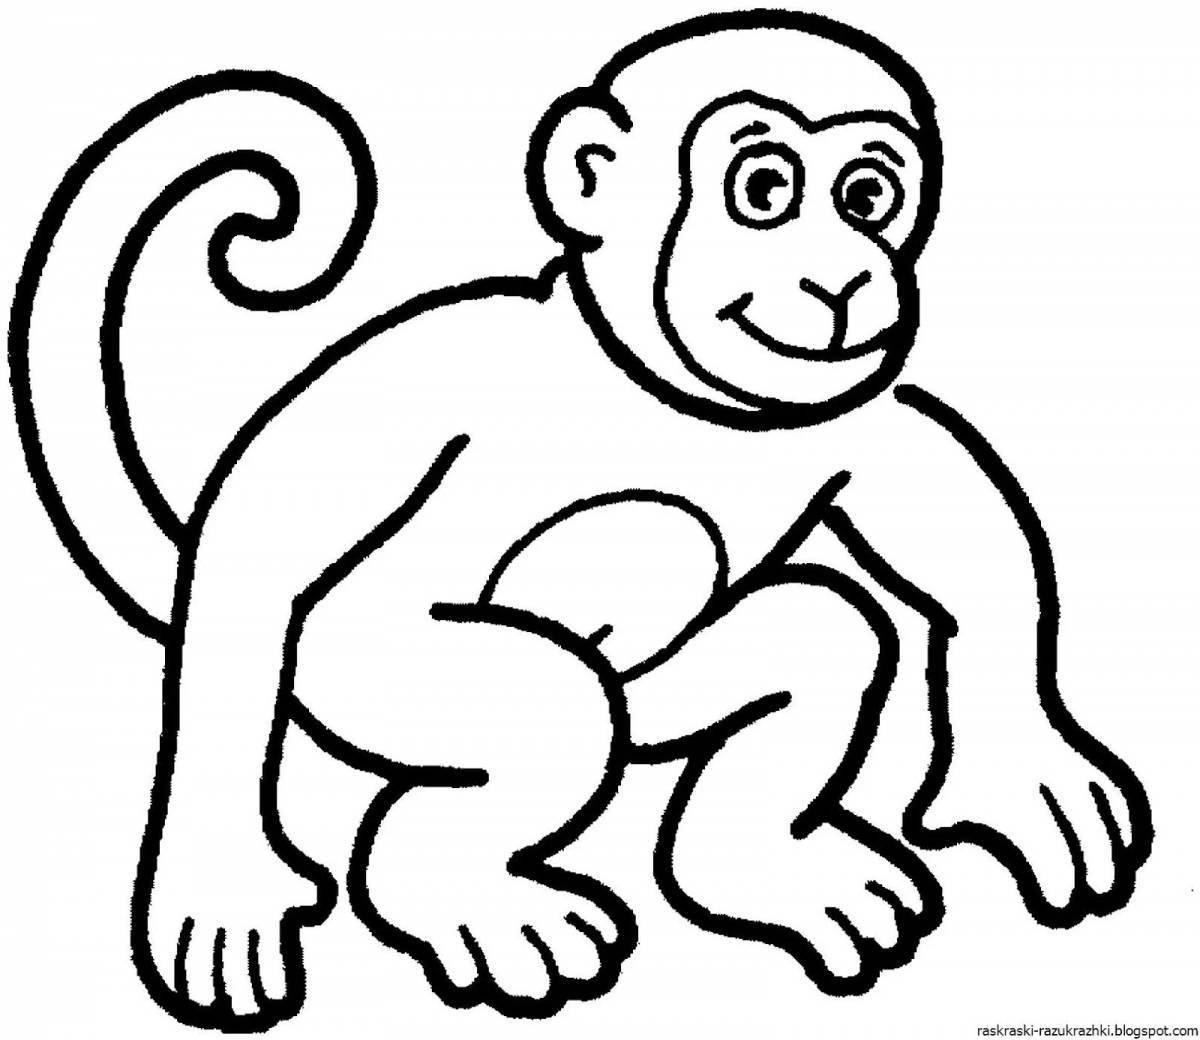 Outstanding monkey coloring page for kids